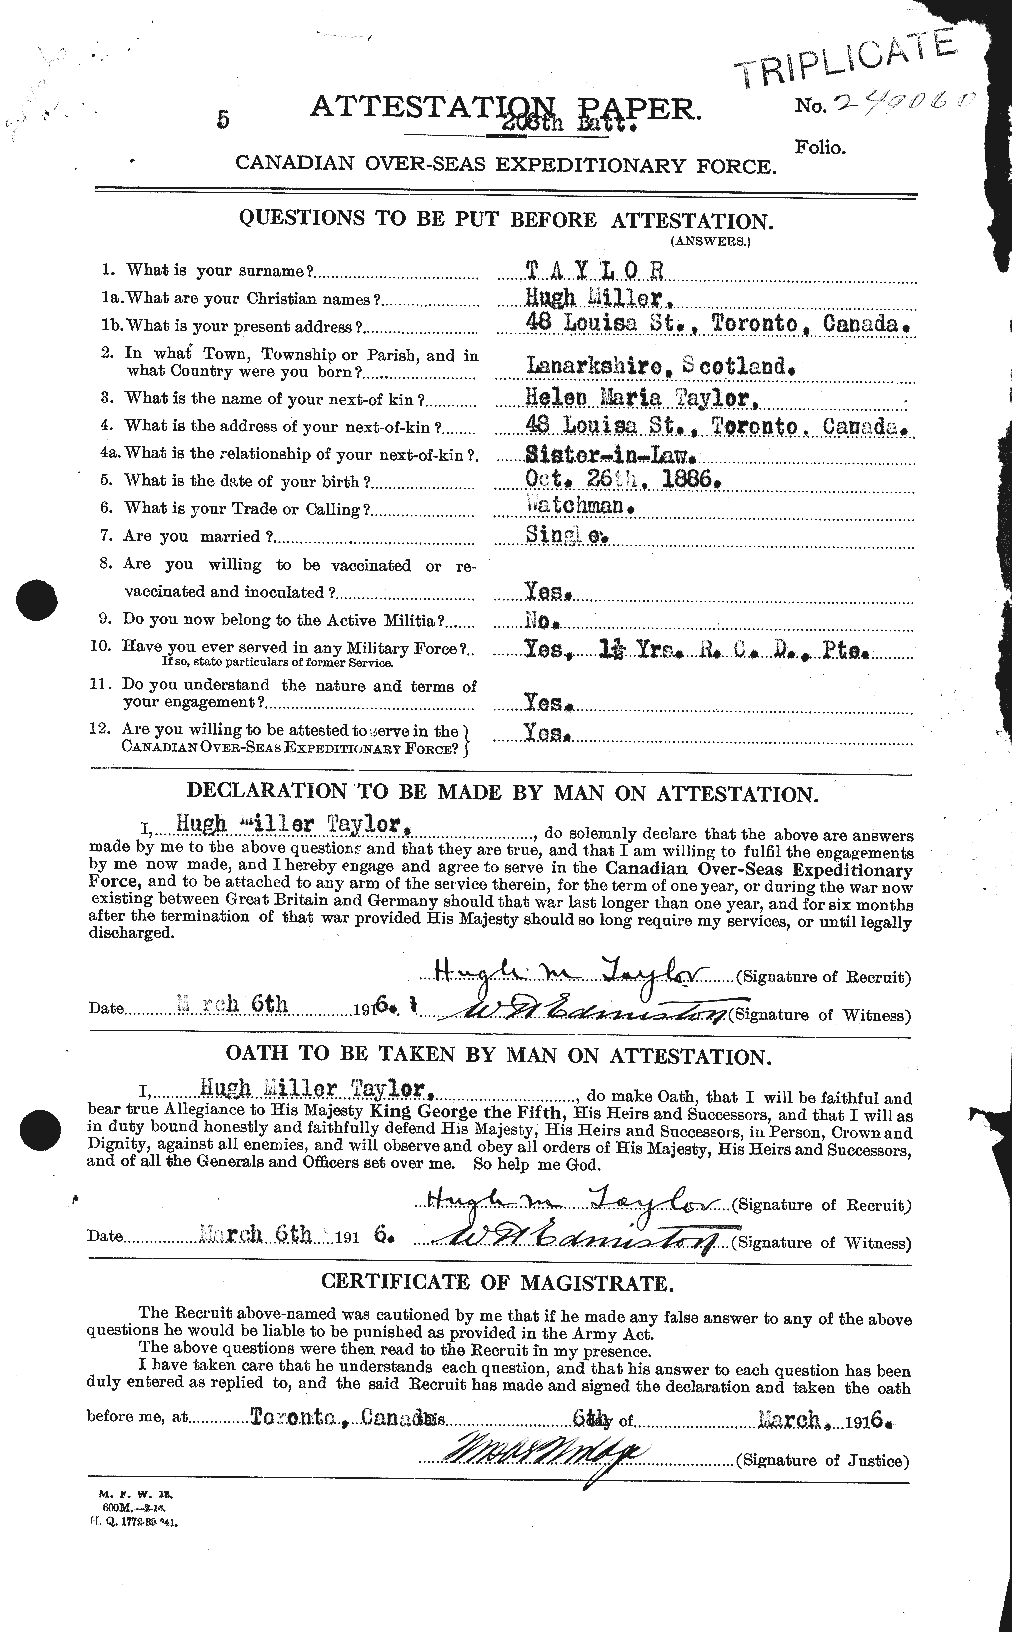 Personnel Records of the First World War - CEF 626619a